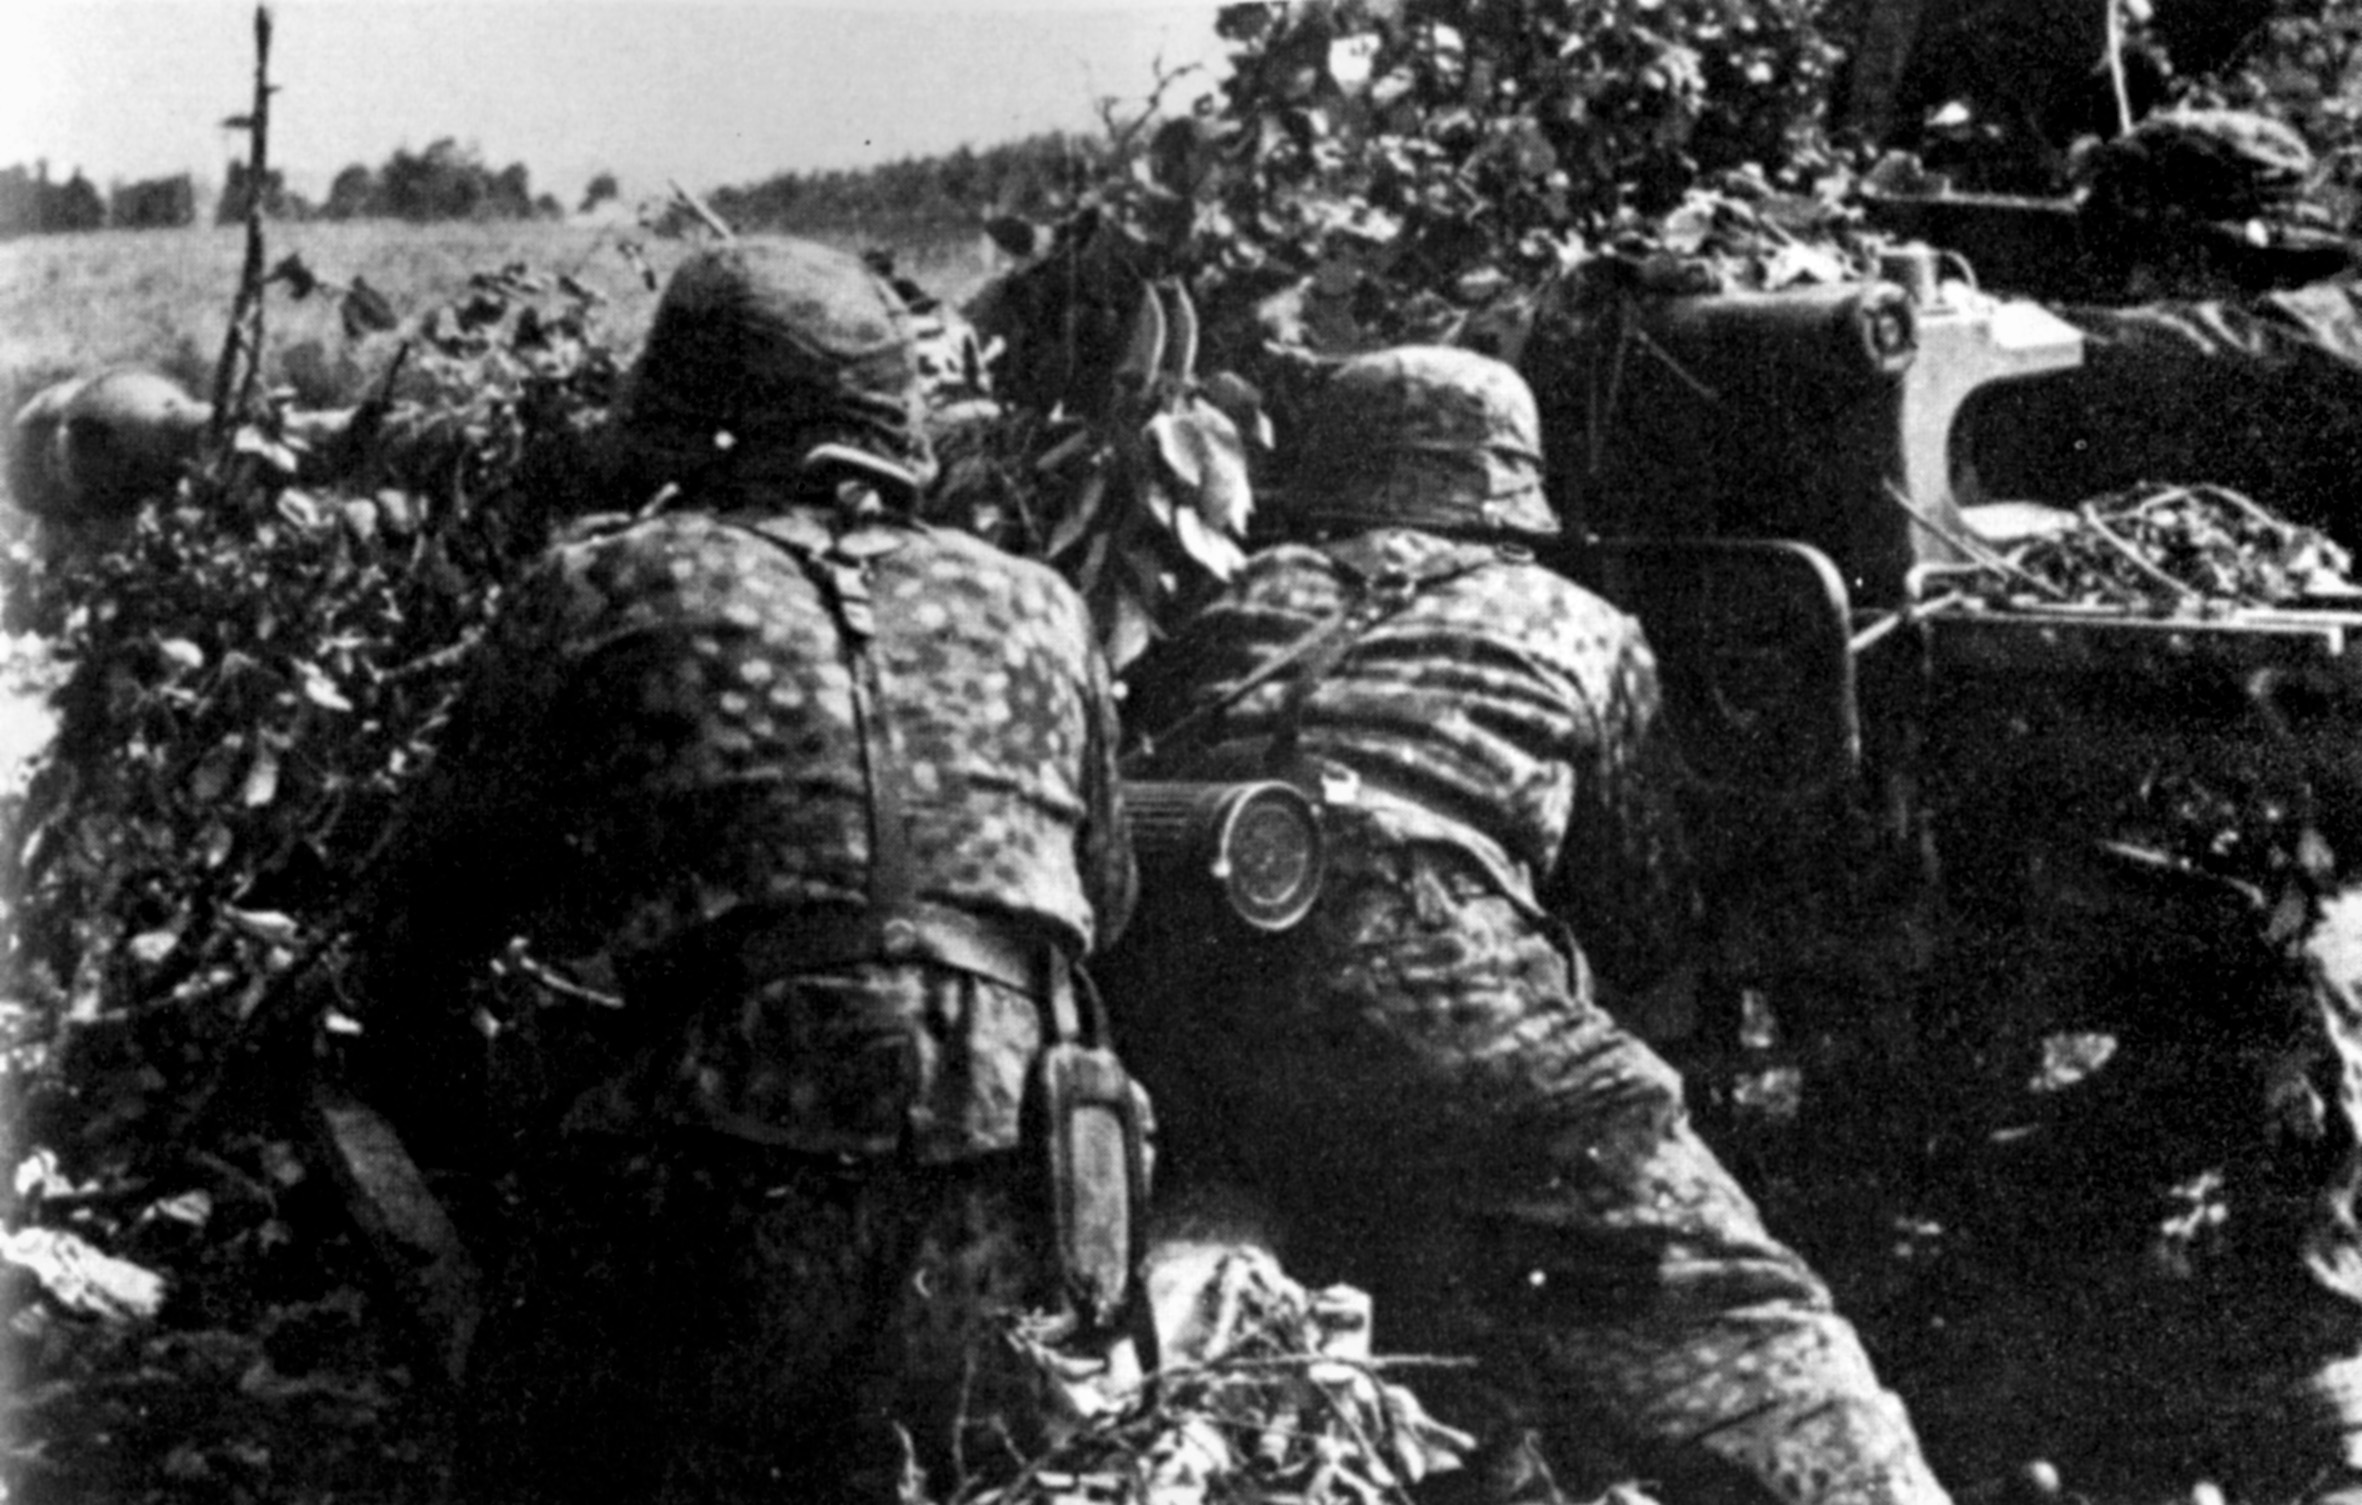 Manning a 75mm anti-tank gun, soldiers of the Waffen SS lie in ambush as they await advancing Soviet tanks and armored vehicles.